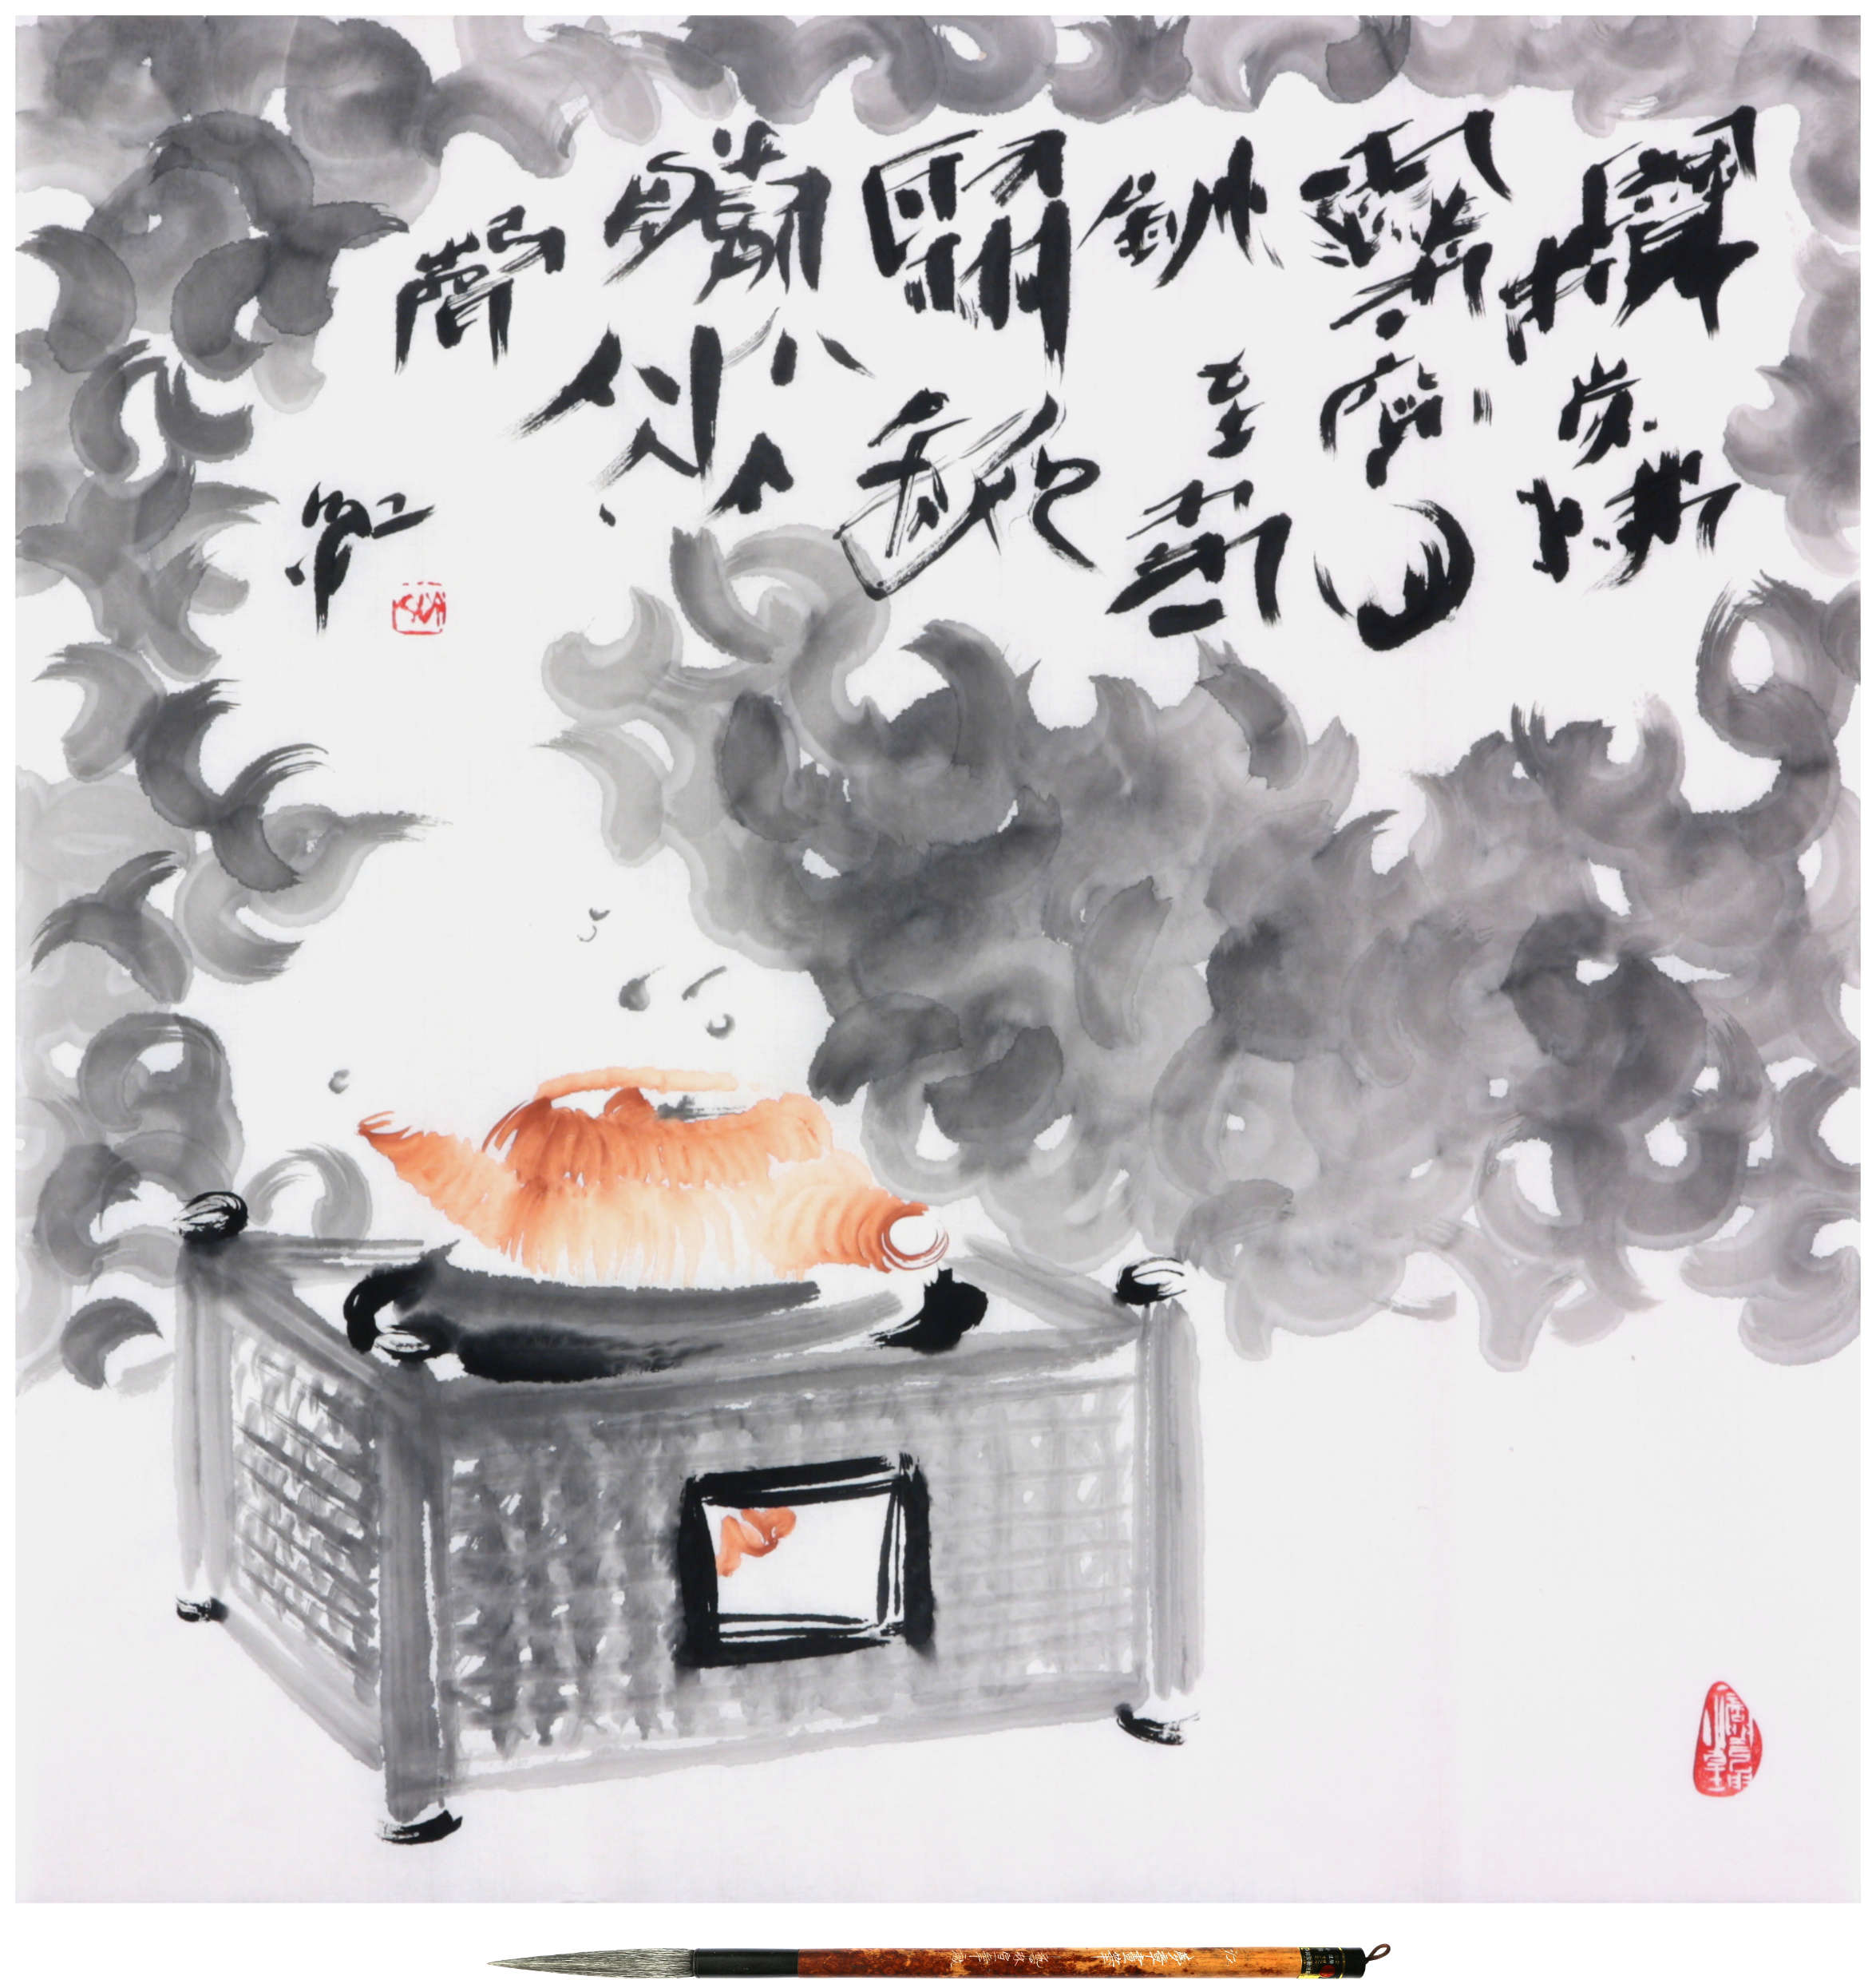 Sai Koh (Qi Hong)’s Freehand Brushwork Traditional Chinese Painting and Calligraphy on Tea: Chinese painting (still life painting, literati painting, ink wash painting), Chinese calligraphy (semi-seal script calligraphy), Chinese seal engraving (Chinese seal carving, Chinese seal cutting) - Olive Pit Charcoal, Bamboo Stove and Chuanxindiao teapot - ink & color on Xuan paper, 2018 - Inscriptions: Charcoal, snow and purple clay teapot; What a joyful gathering of best friends! Koh (Hong); Chinese, 欖炭沸雪穿心銚 至友聚飲勝花聲 紅 - Seal: Sai (Qi); Chinese, 齊 A Drop of Water Moistens the Universe; Chinese, 一滴潤乾坤 - Xuan Paper: Mian Liao Mian Lian, 69×68cm - Brush: Goat Hair Long Head Brush, Meng Zhang Hua Bi · Jiang